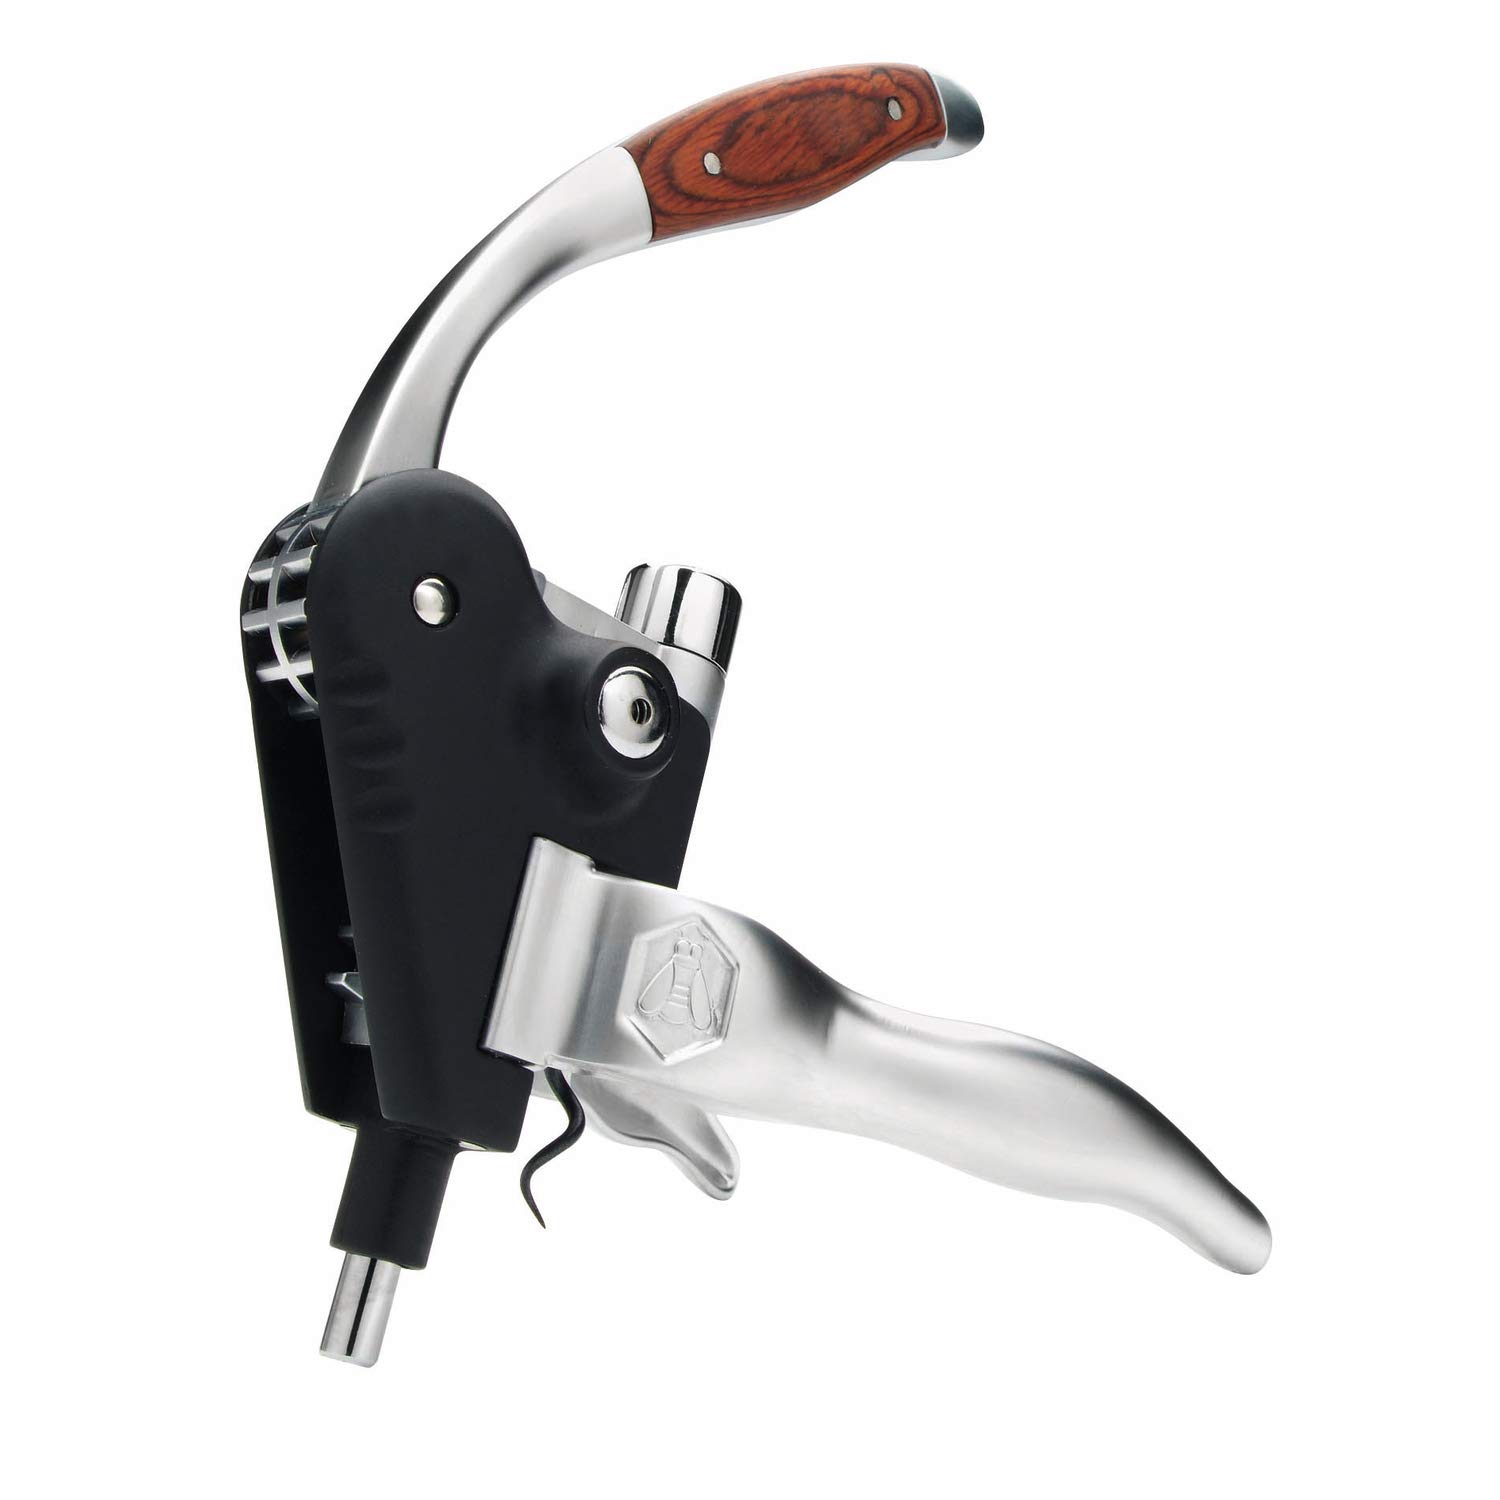 Laguiole metal and wood corkscrew